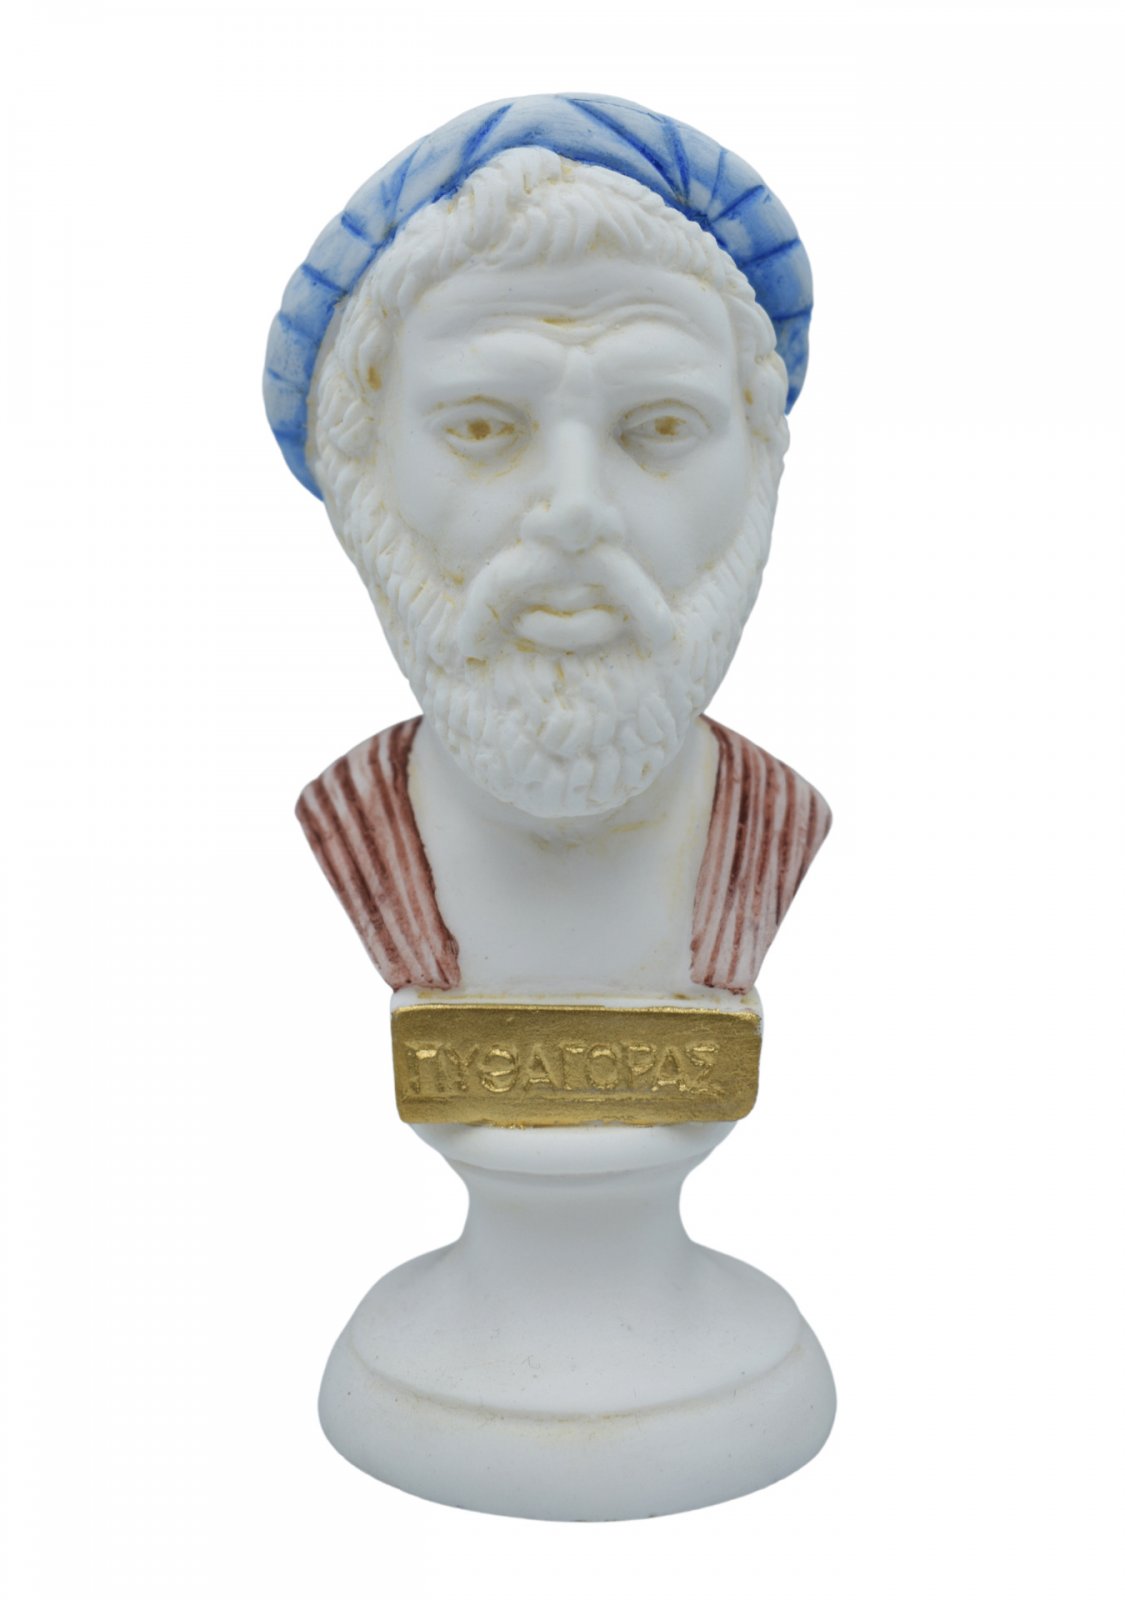 Pythagoras alabaster bust statue with color and patina